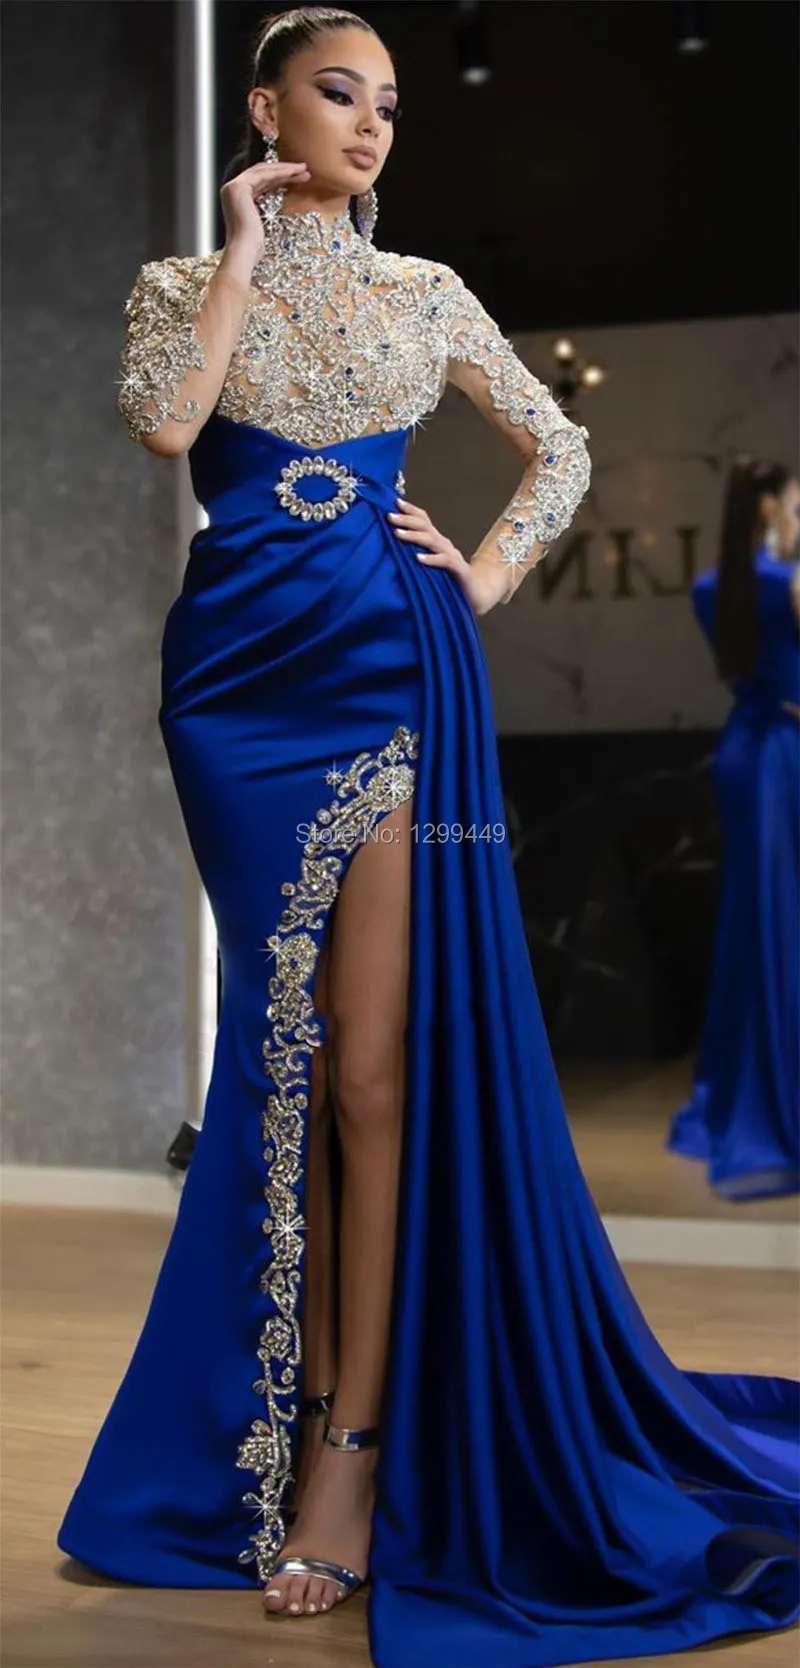 Eightale Royal Blue Evening Dresses 2020 High Neck Beaded Side Split Sexy Prom Gown Long Sleeves Formal Arabic Dubai Party Dress